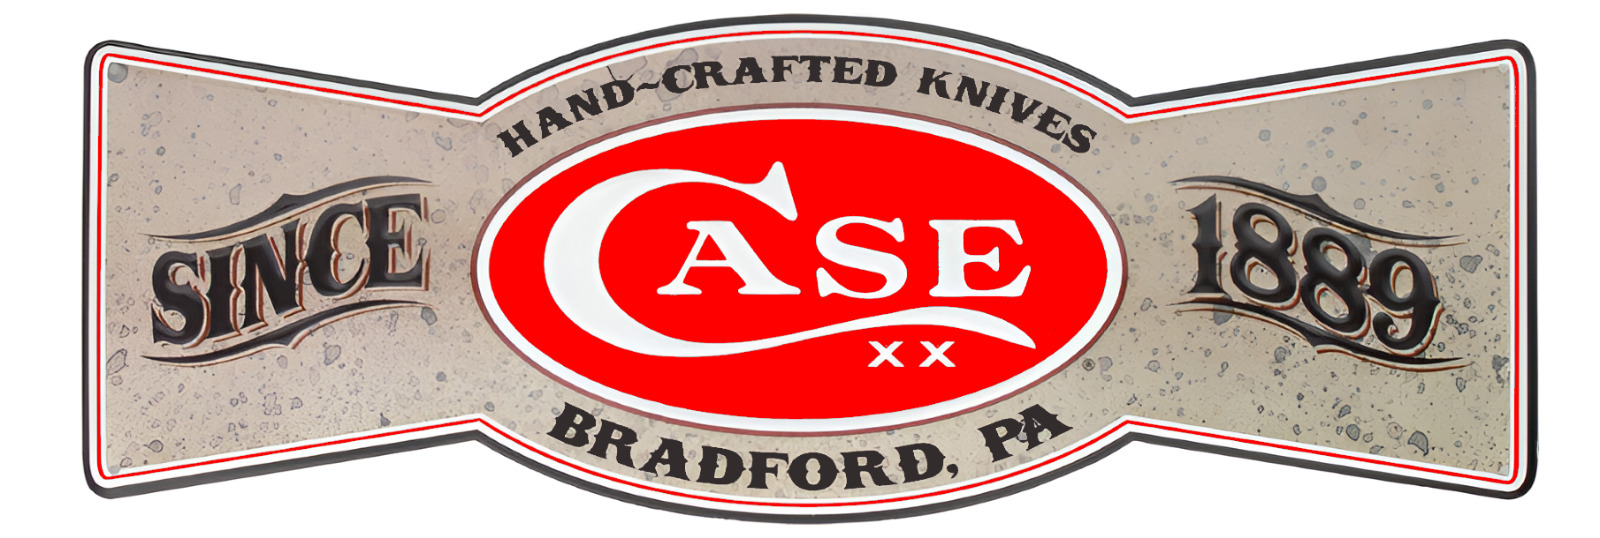 Case handcrafted knives  Metal Sign 6